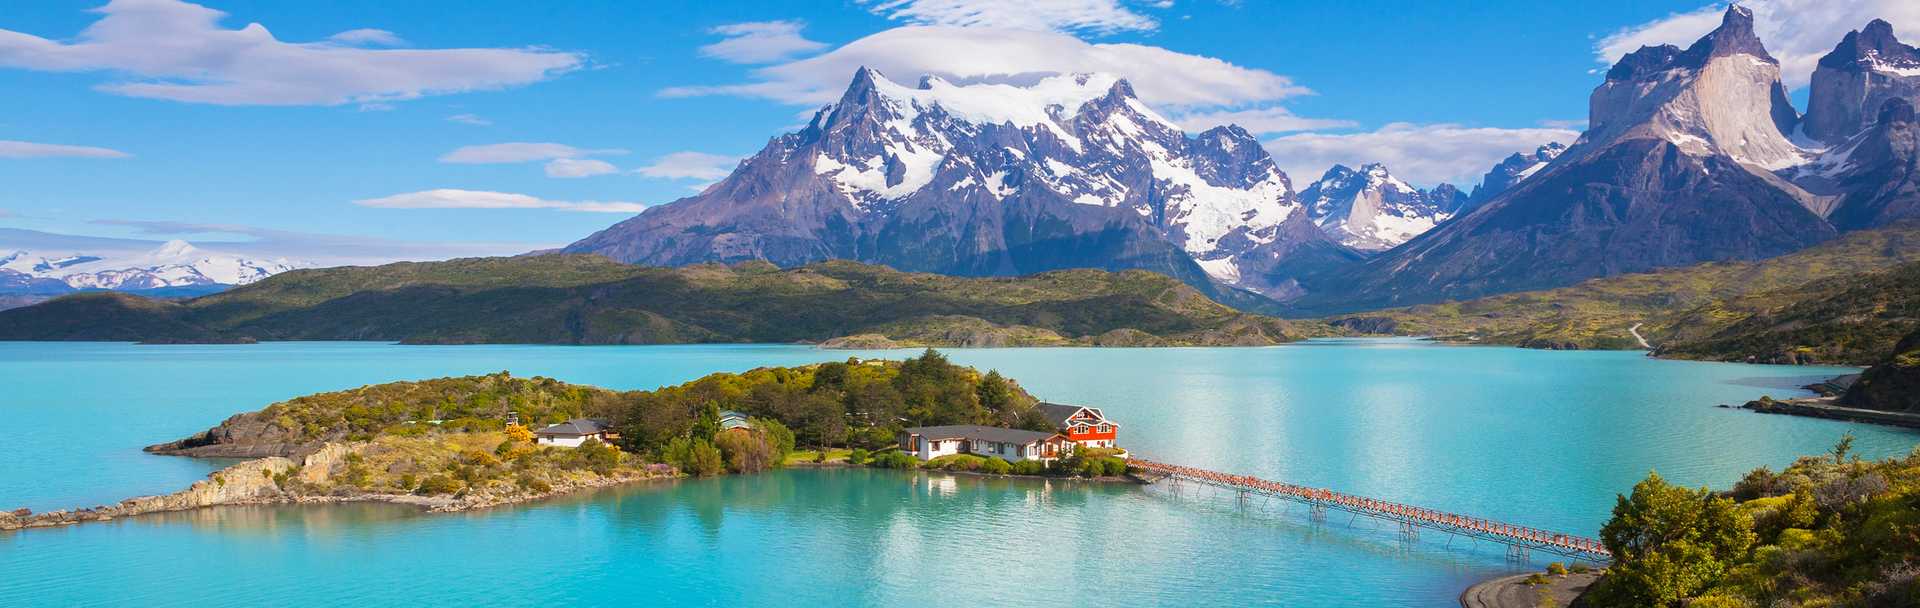 Bird's-eye view of Pehoe Lake with mountains in the background in Patagonia.